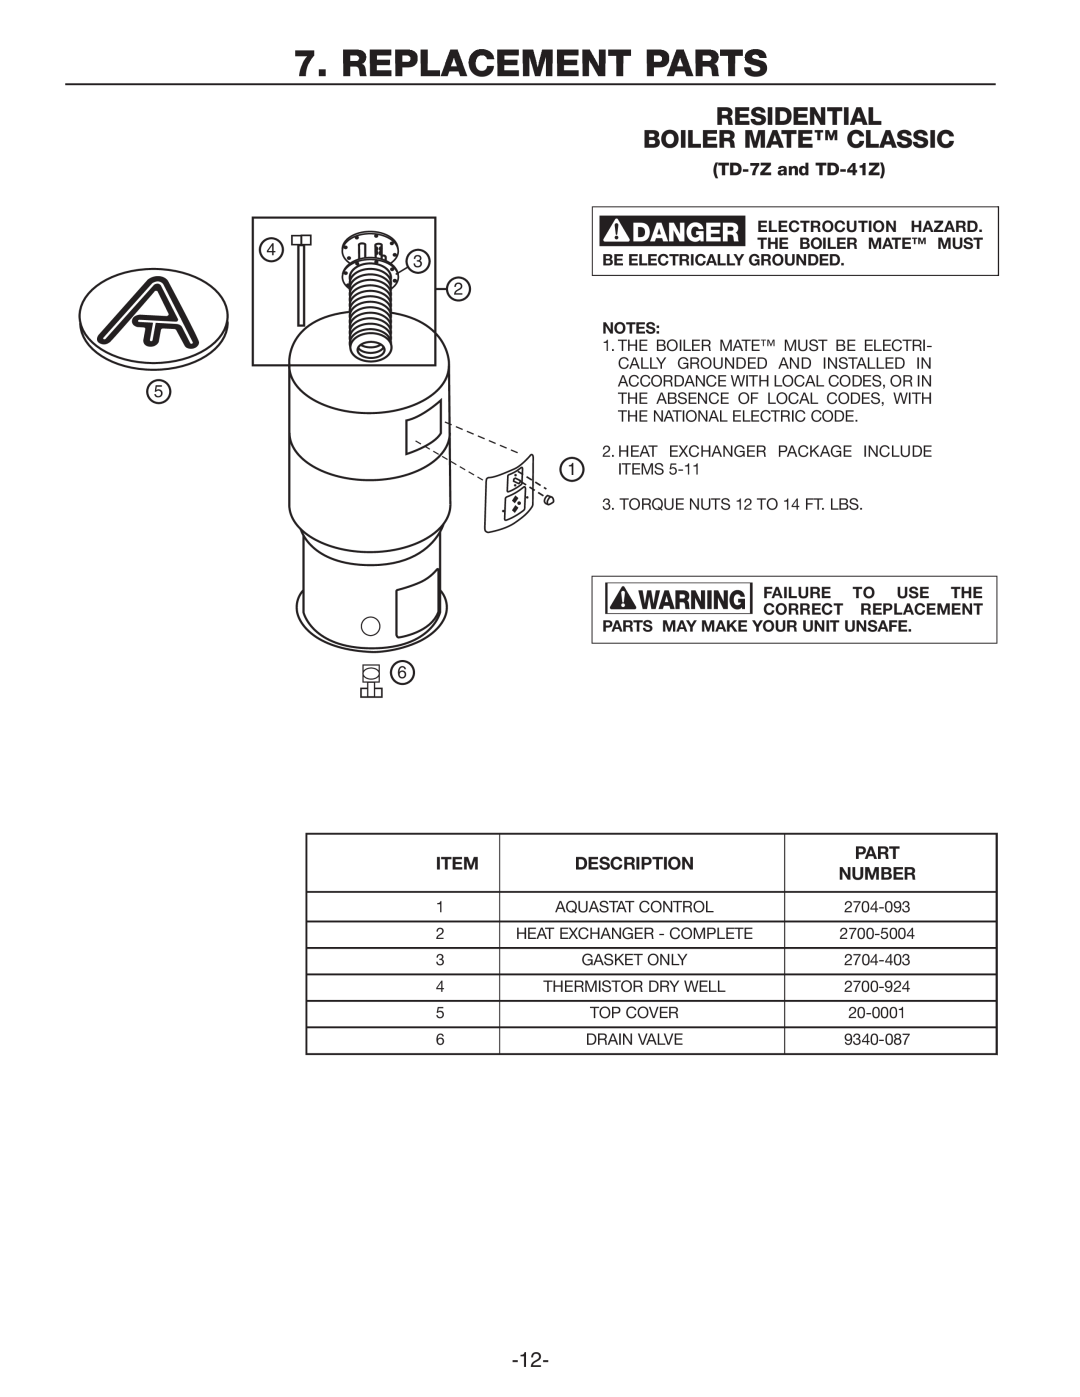 Amtrol TD-41ZDW, TD-7ZDW manual Replacement Parts, Residential Boiler Mate Classic, TD-7Zand TD-41Z, Description, Number 